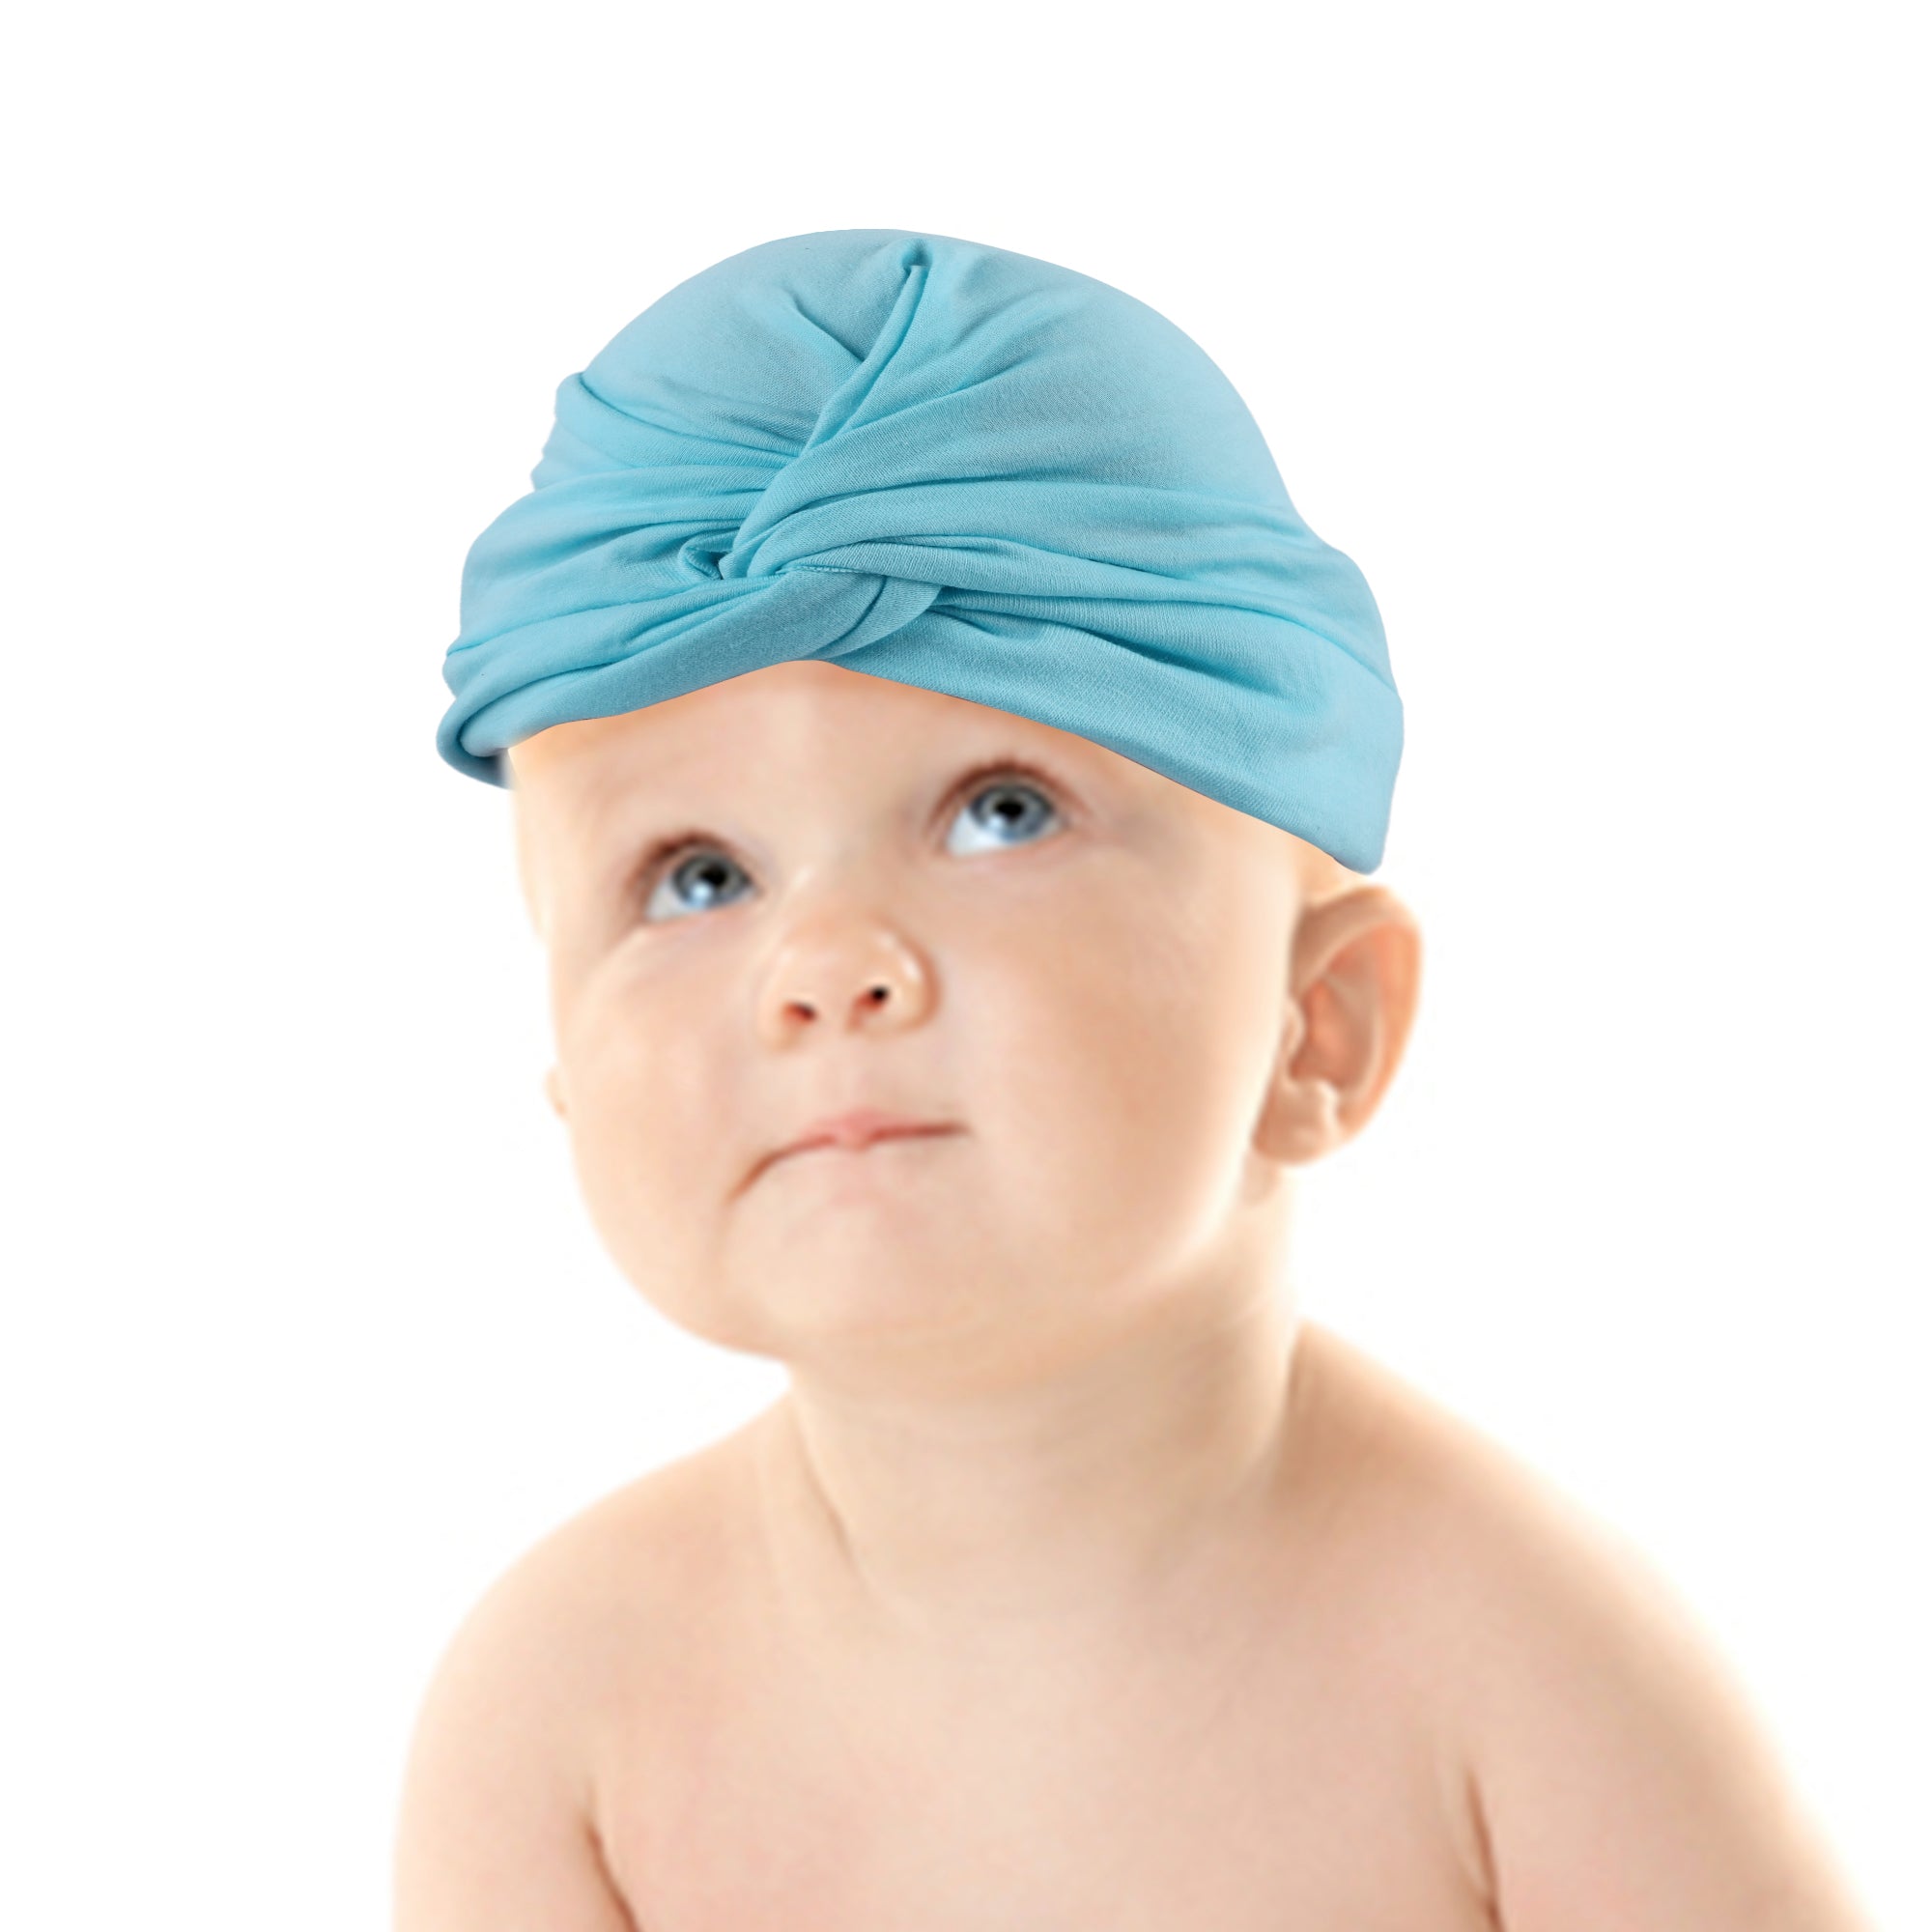 Cute Knotted Turban Cap Infant Beanie - Blue - Baby Moo